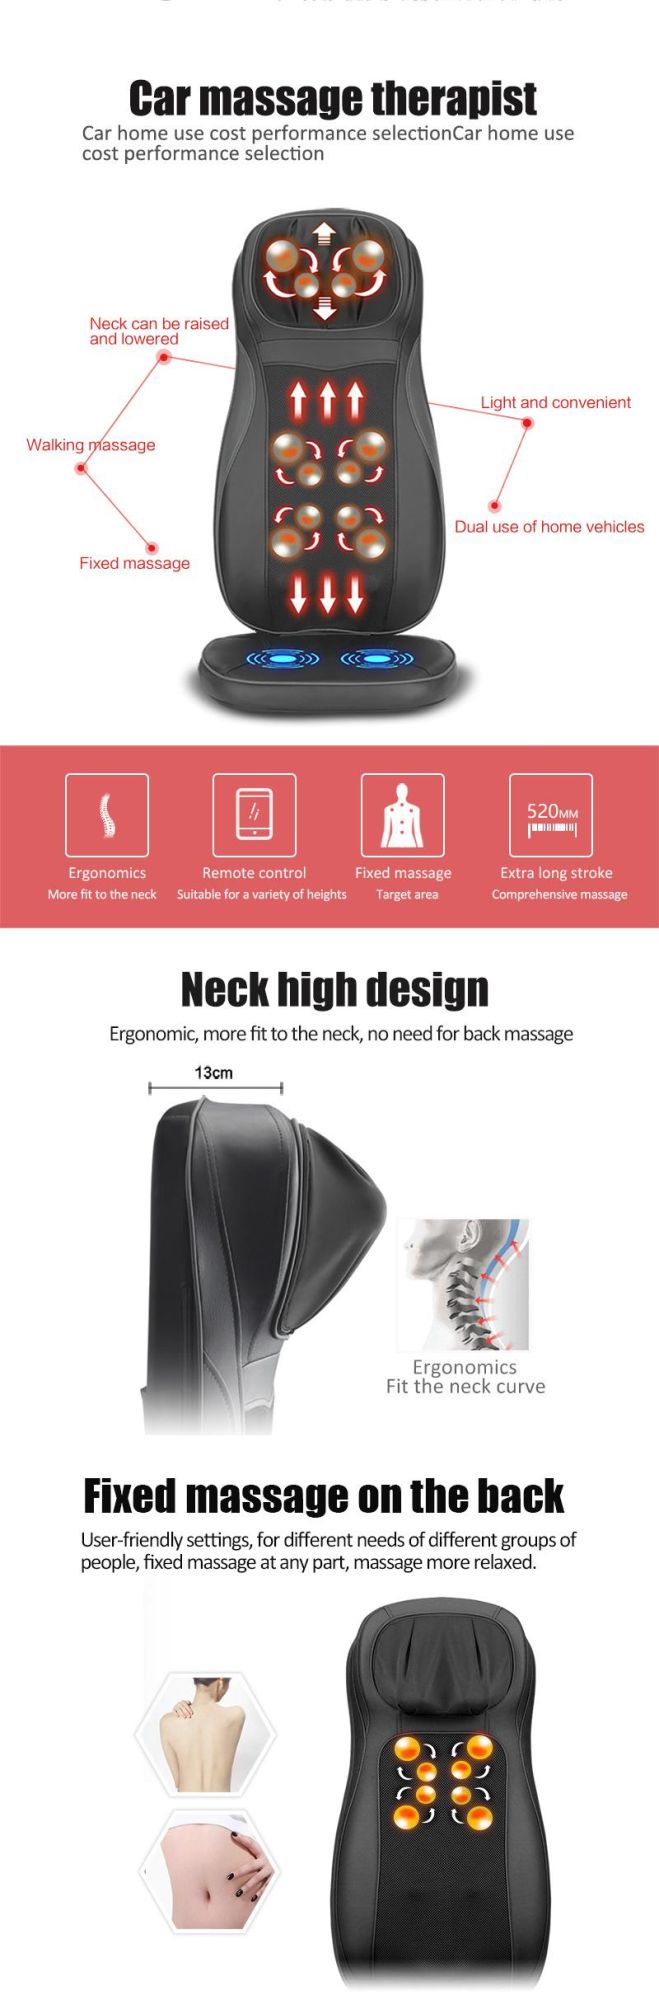 Smartsense Shiatsu Realtouch Chair Pad Soothing Heat 4 Deep Kneading Gel Nodes Pain Relief for Neck Back Shoulders Lumbar Massage Cushion